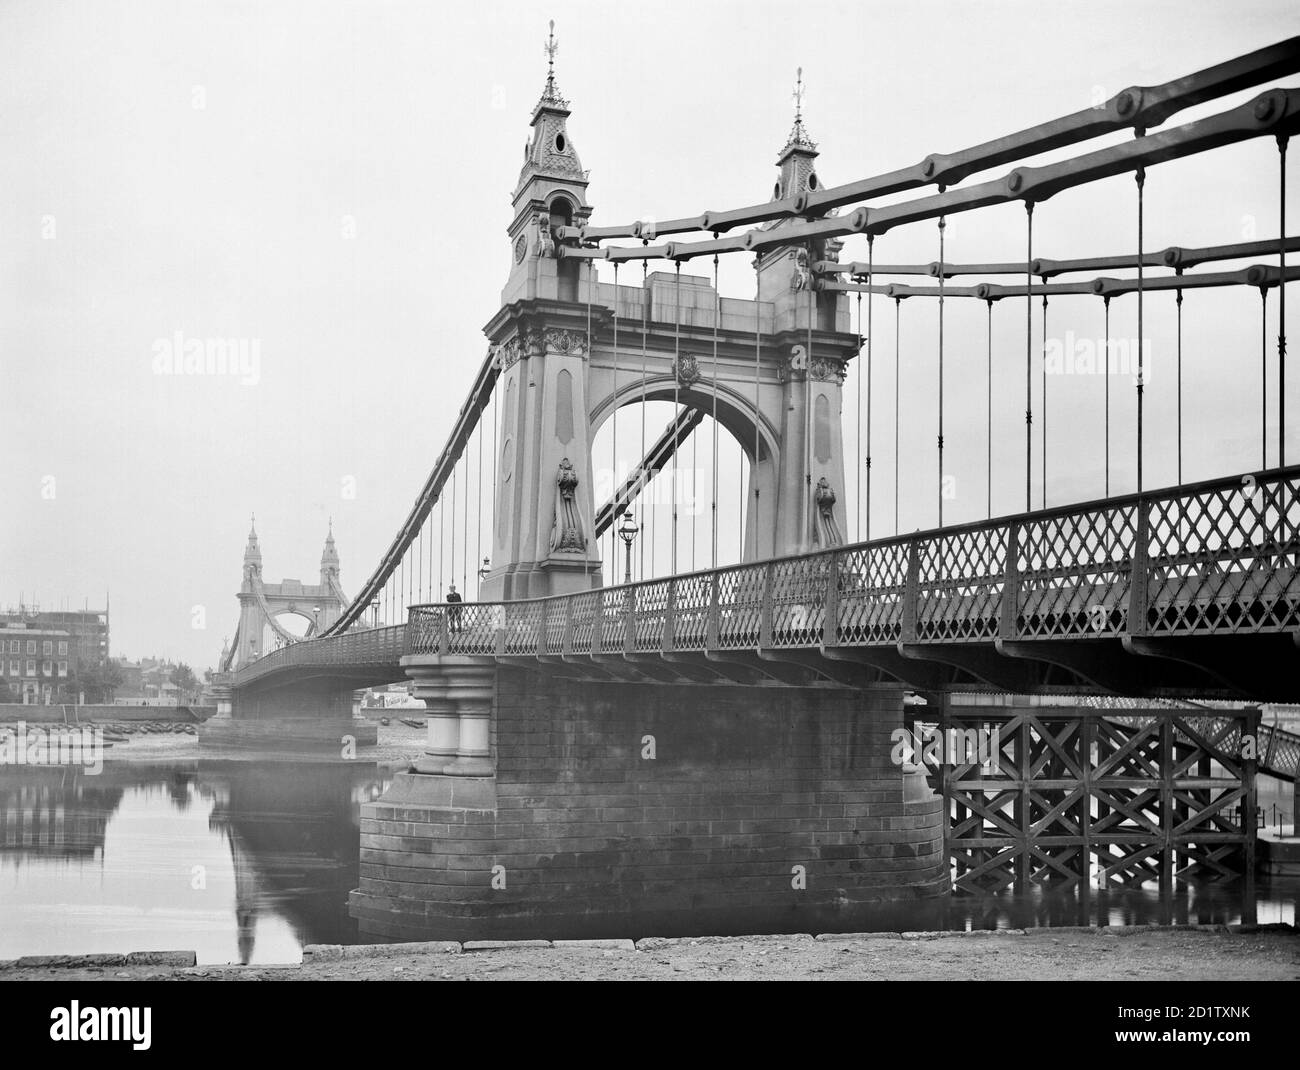 HAMMERSMITH BRIDGE, Barnes, Greater London. This decorative suspension bridge is seen here from the riverbank. It was built in 1887, designed by Sir Joseph Bazalgette, the distinguished civil engineer who was also responsible for London's sewage system as well as a number of other bridges. Photographed by Henry Taunt in 1895. Stock Photo